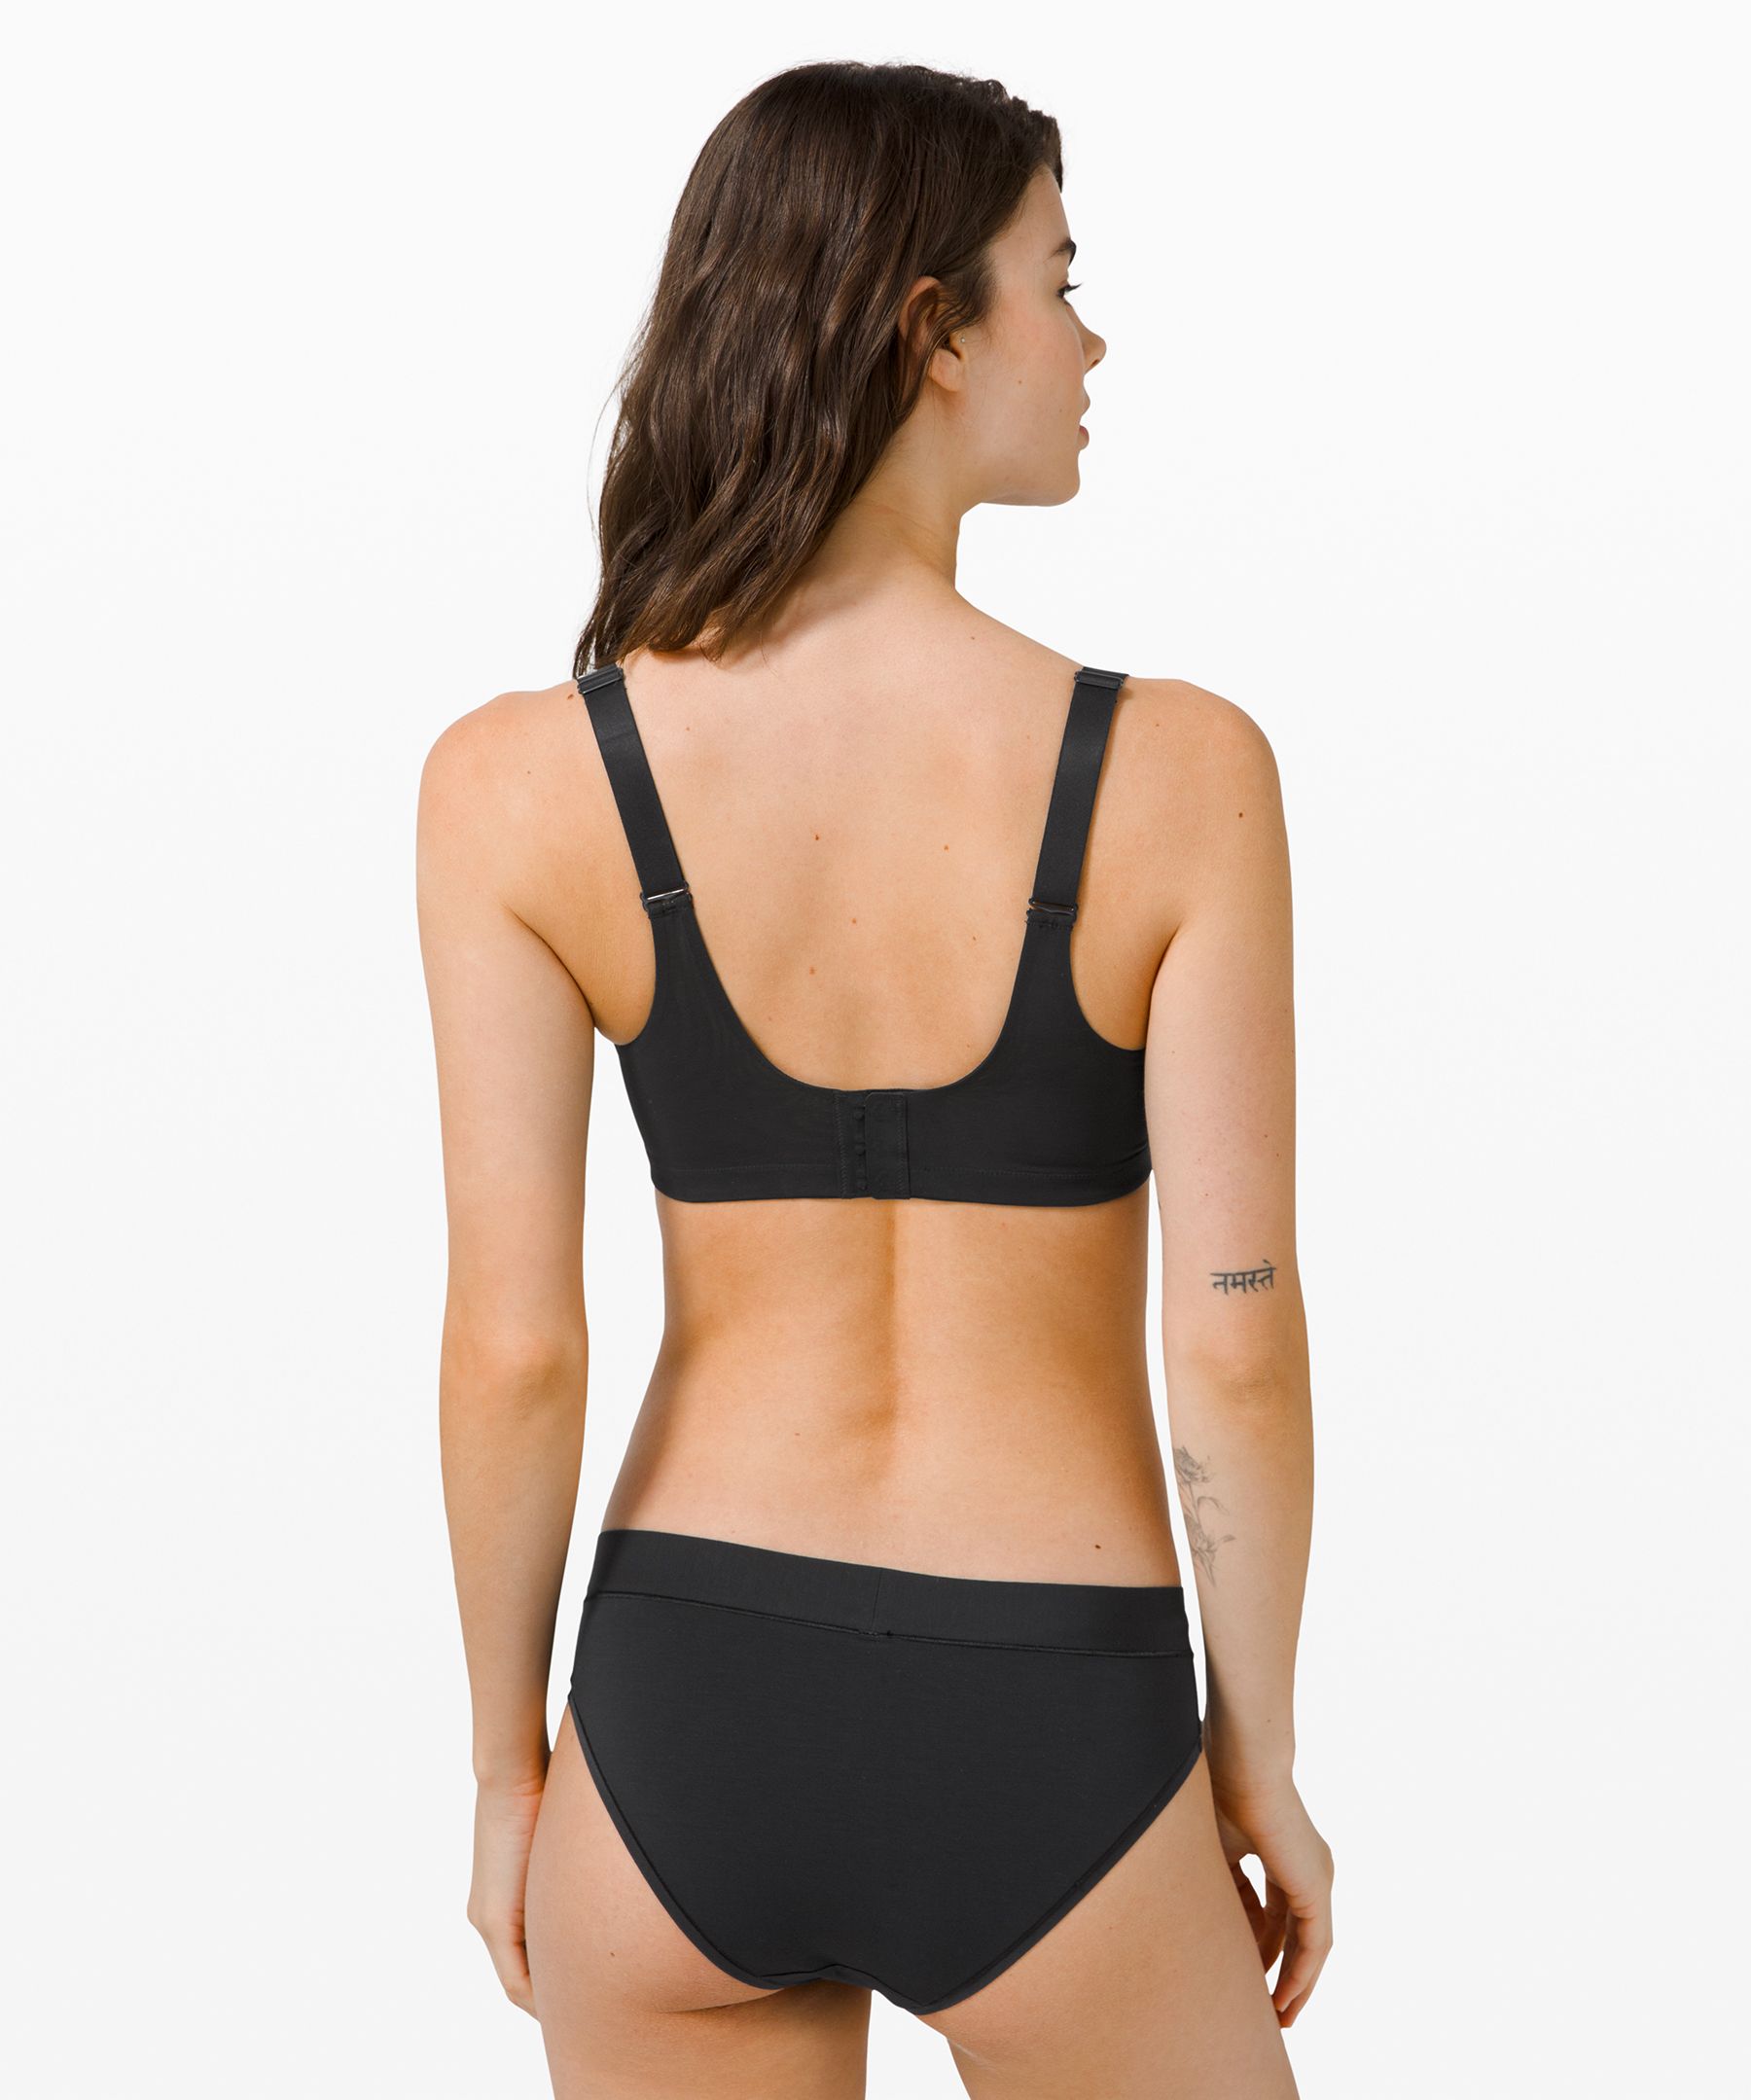 Composed Bra *Light Support for B/C Cup